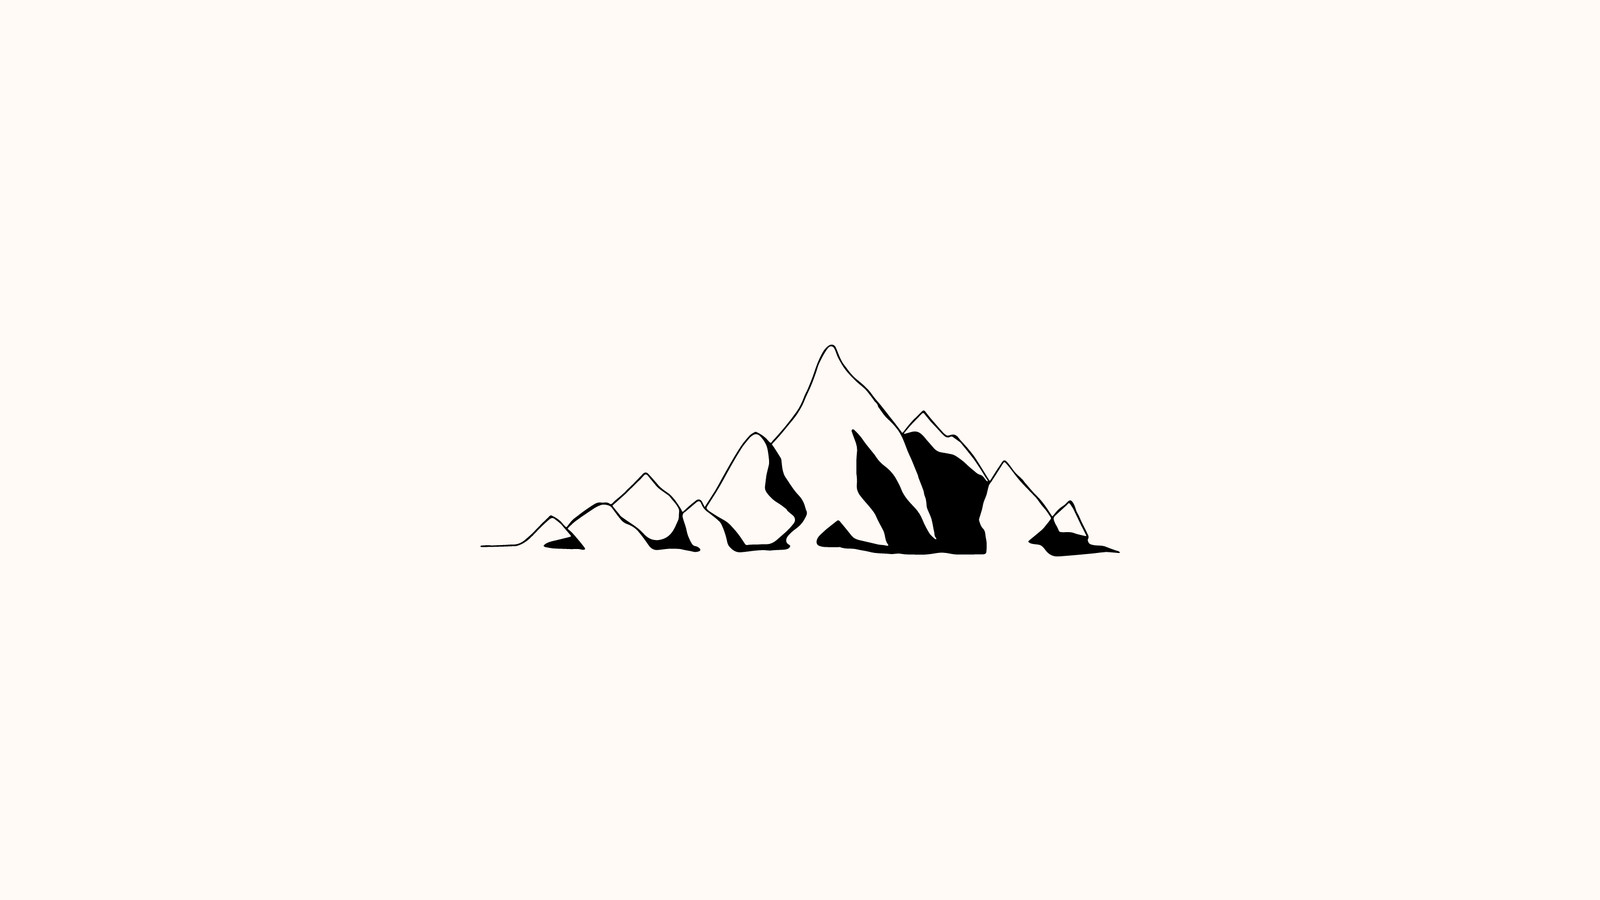 Monochrome mountains Minimalist landscape Grey nature view Black and  white peaks Design for poster calendar wallpaper card postcard mural  Watercolour illustration on white background  Stock Image  Everypixel